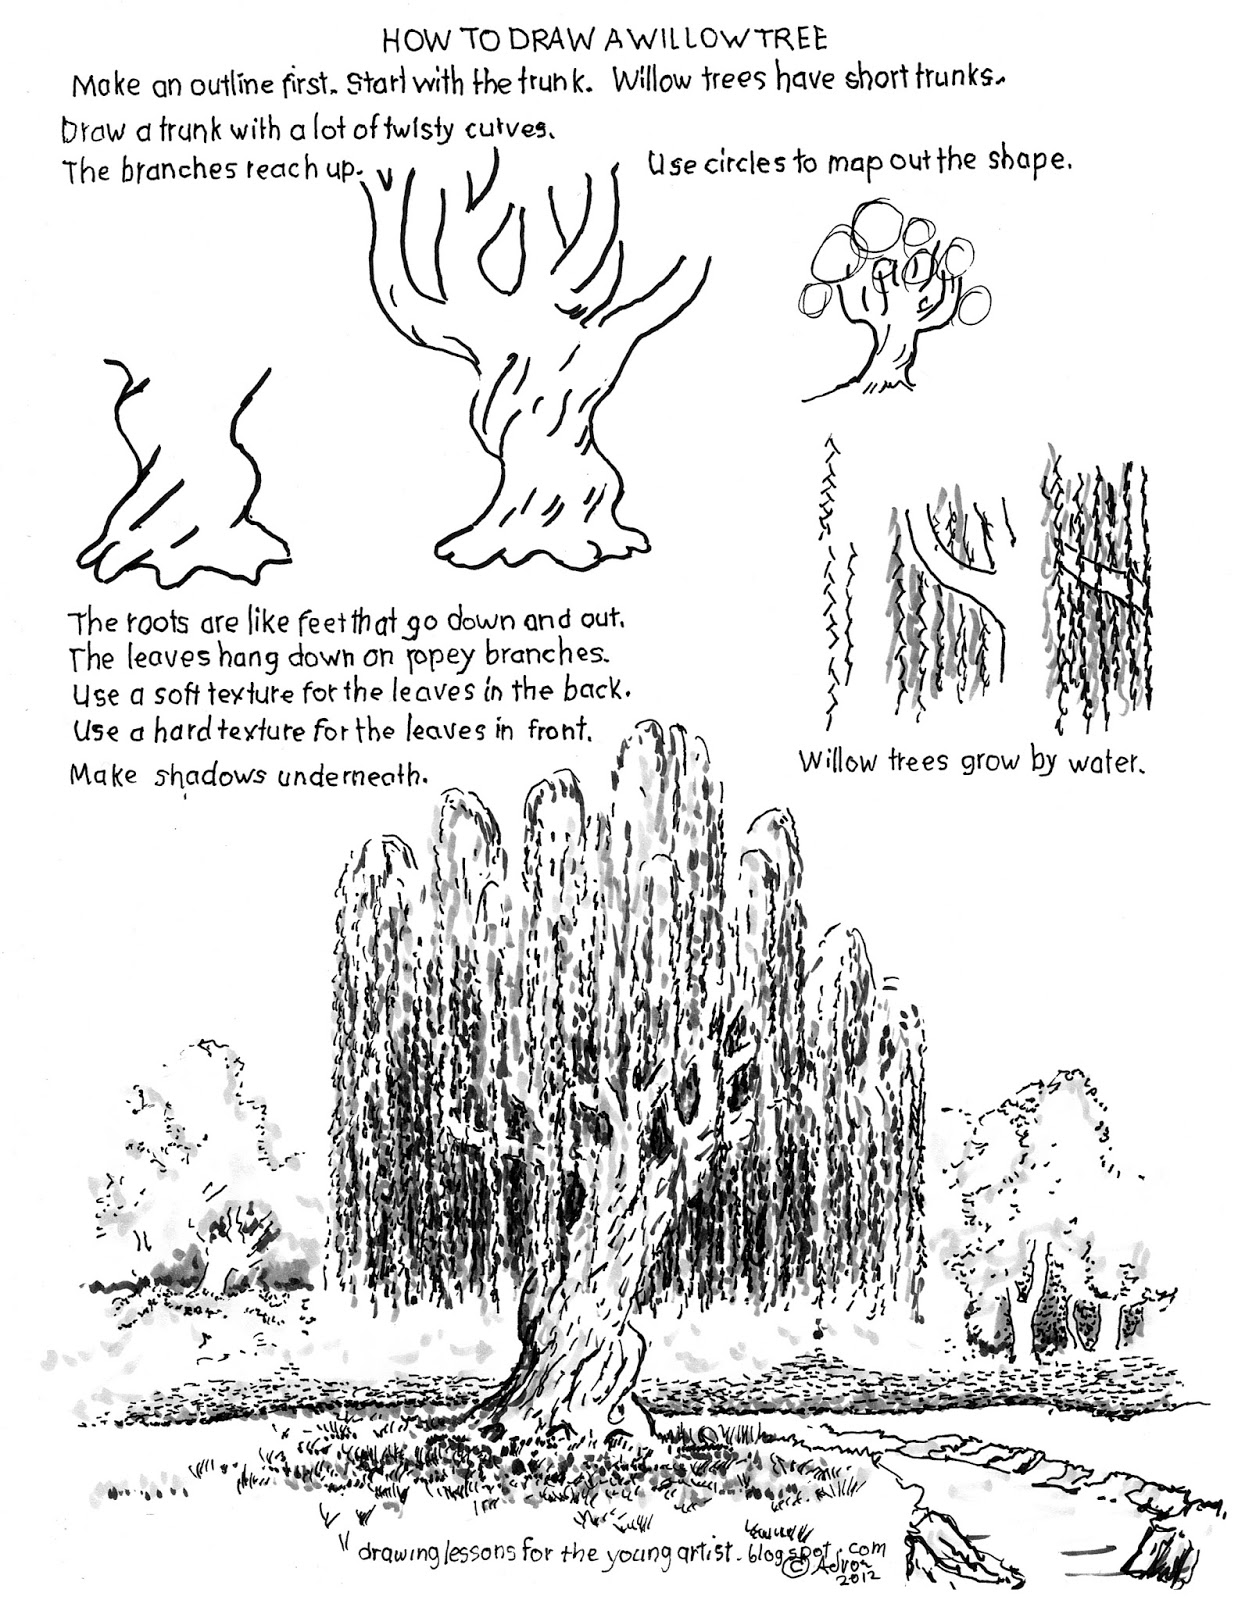 How to Draw Worksheets for The Young Artist: How to Draw a Willow Tree.